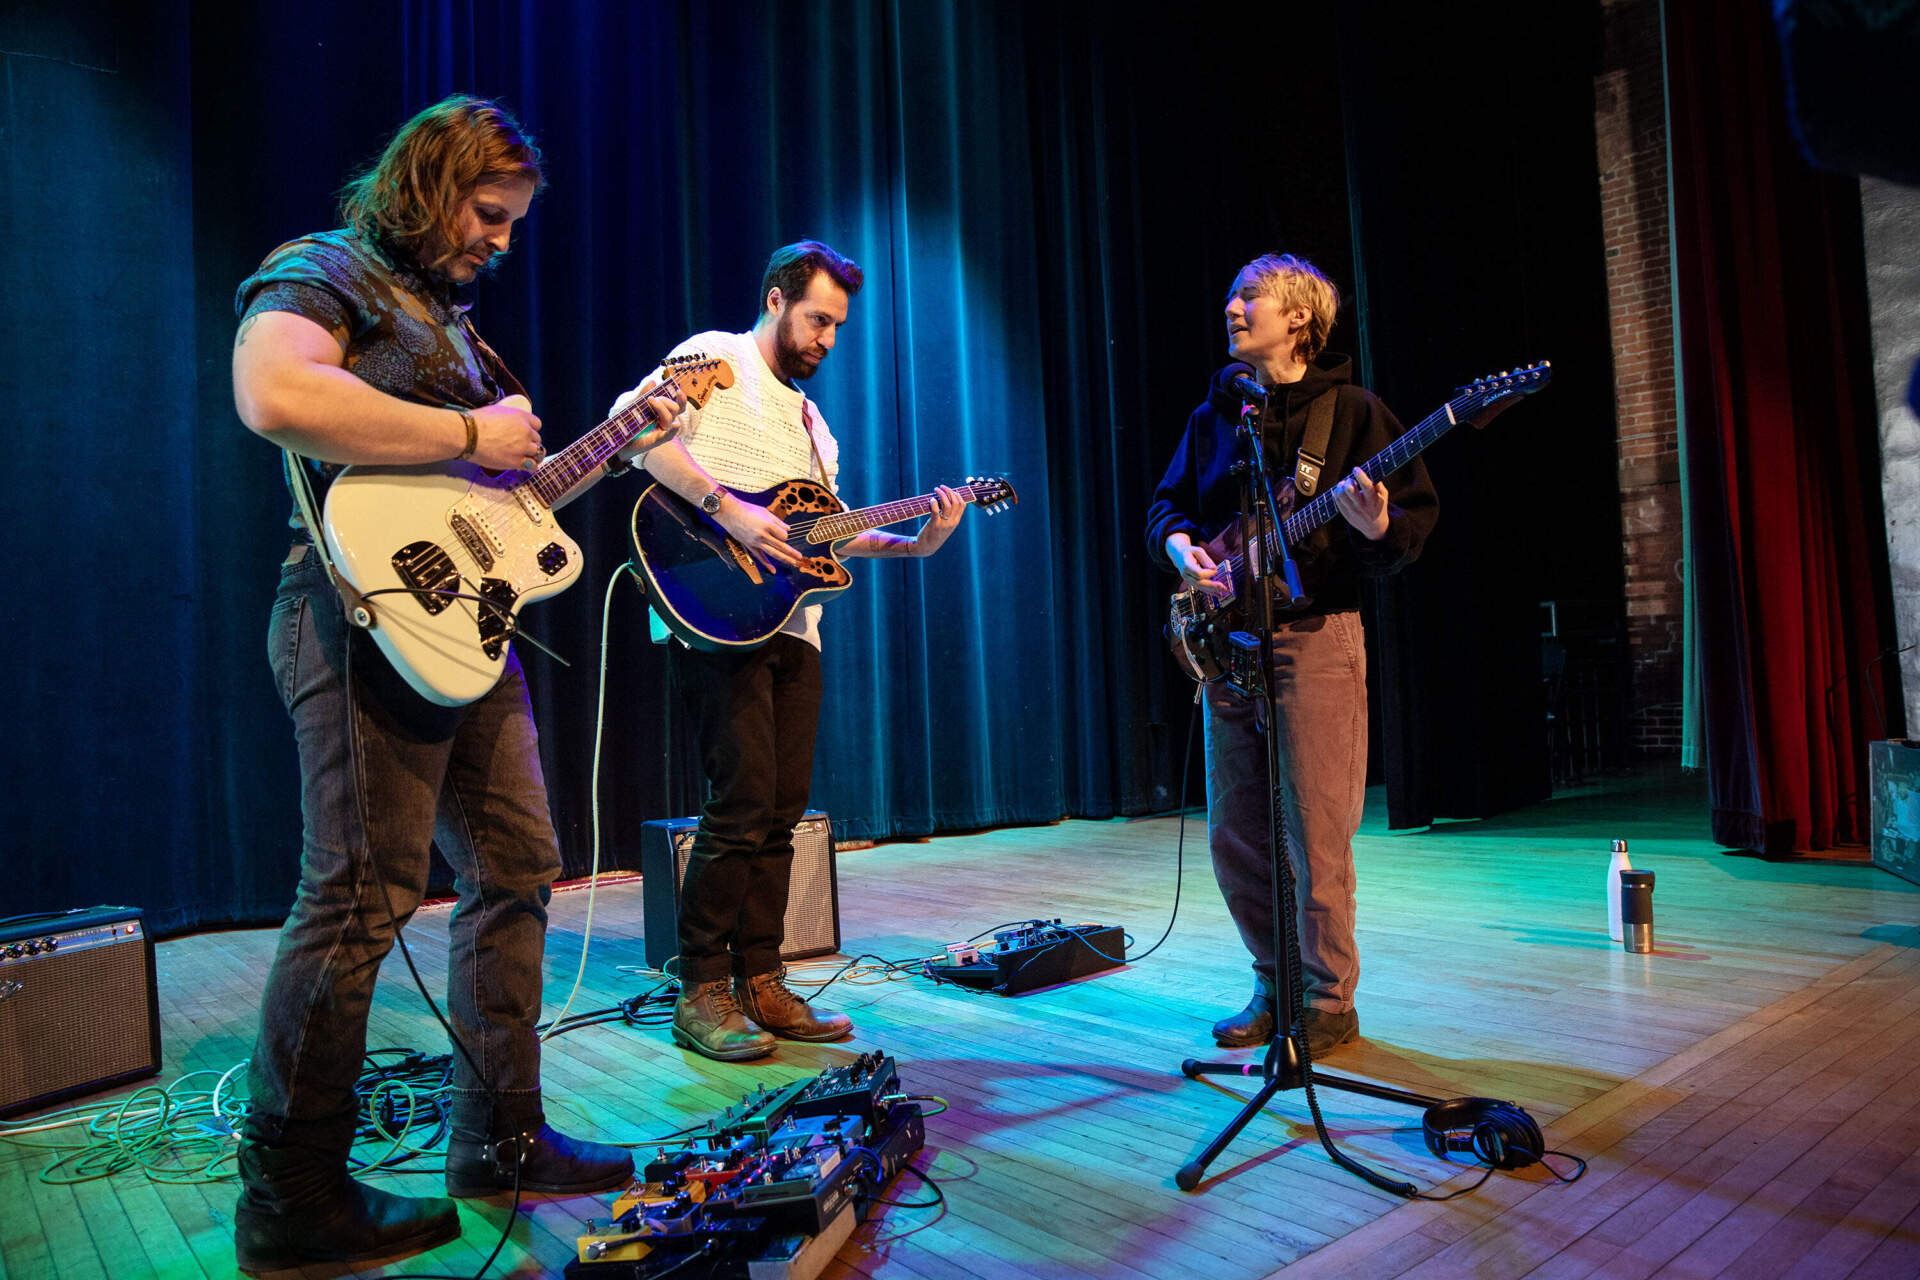 Cloudbelly playing on the stage at Shea Theater Arts Center in Turners Falls, Mass. (Robin Lubbock/WBUR)